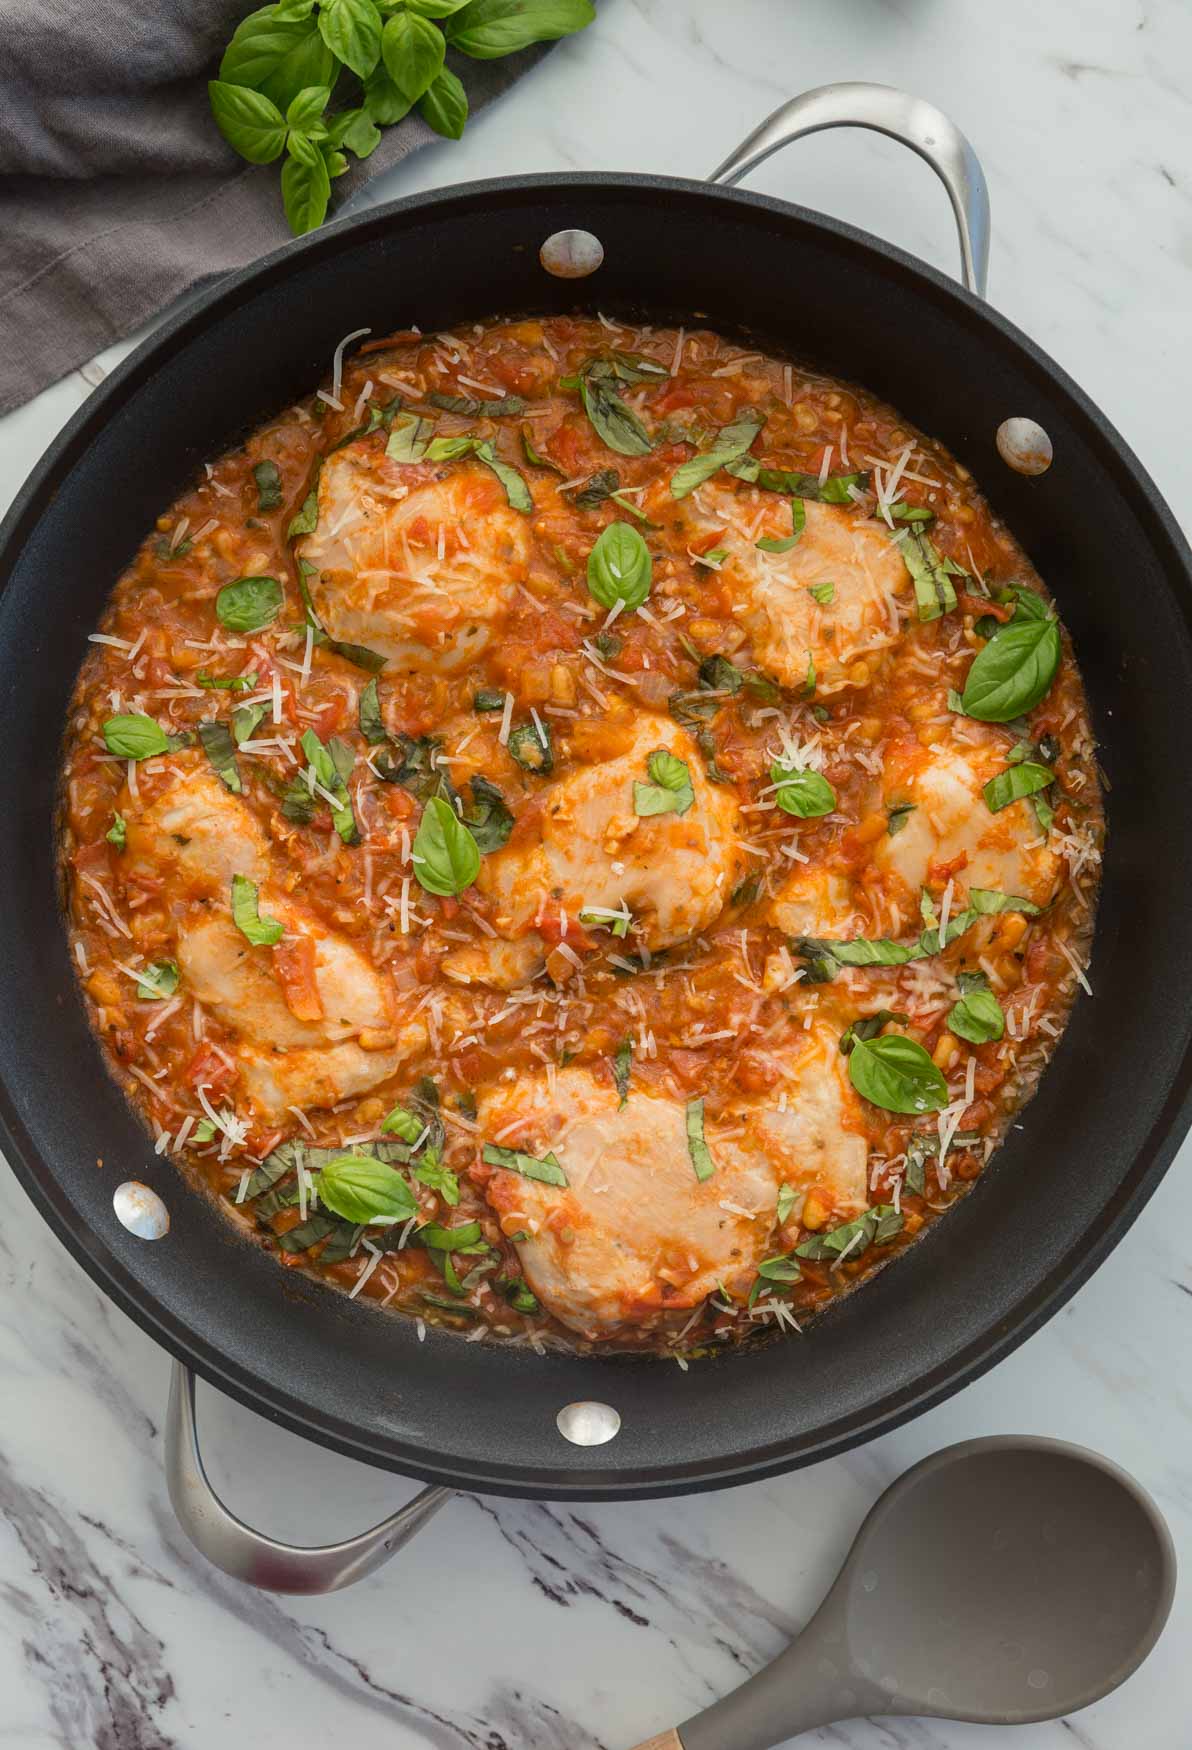 Garlic basil chicken with tomato sauce in a large skillet.